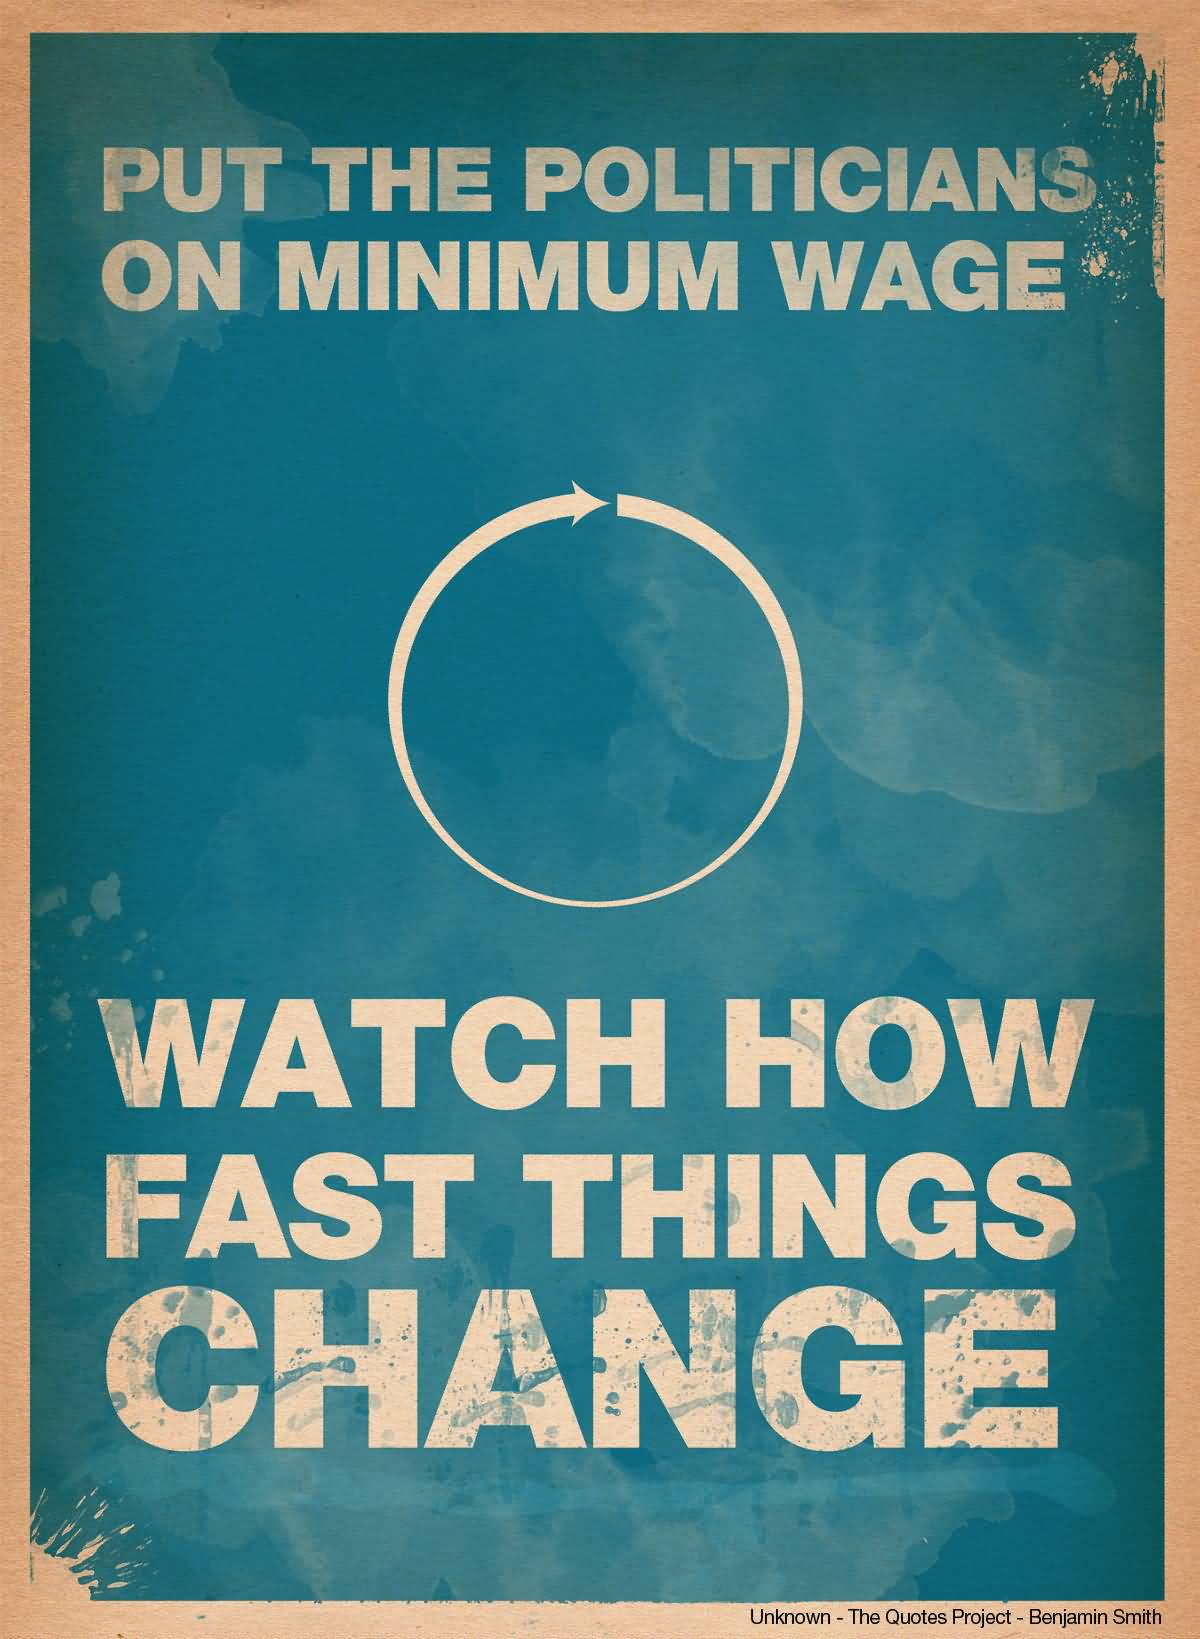 Put the politicians on minimum wage and watch how fast things change